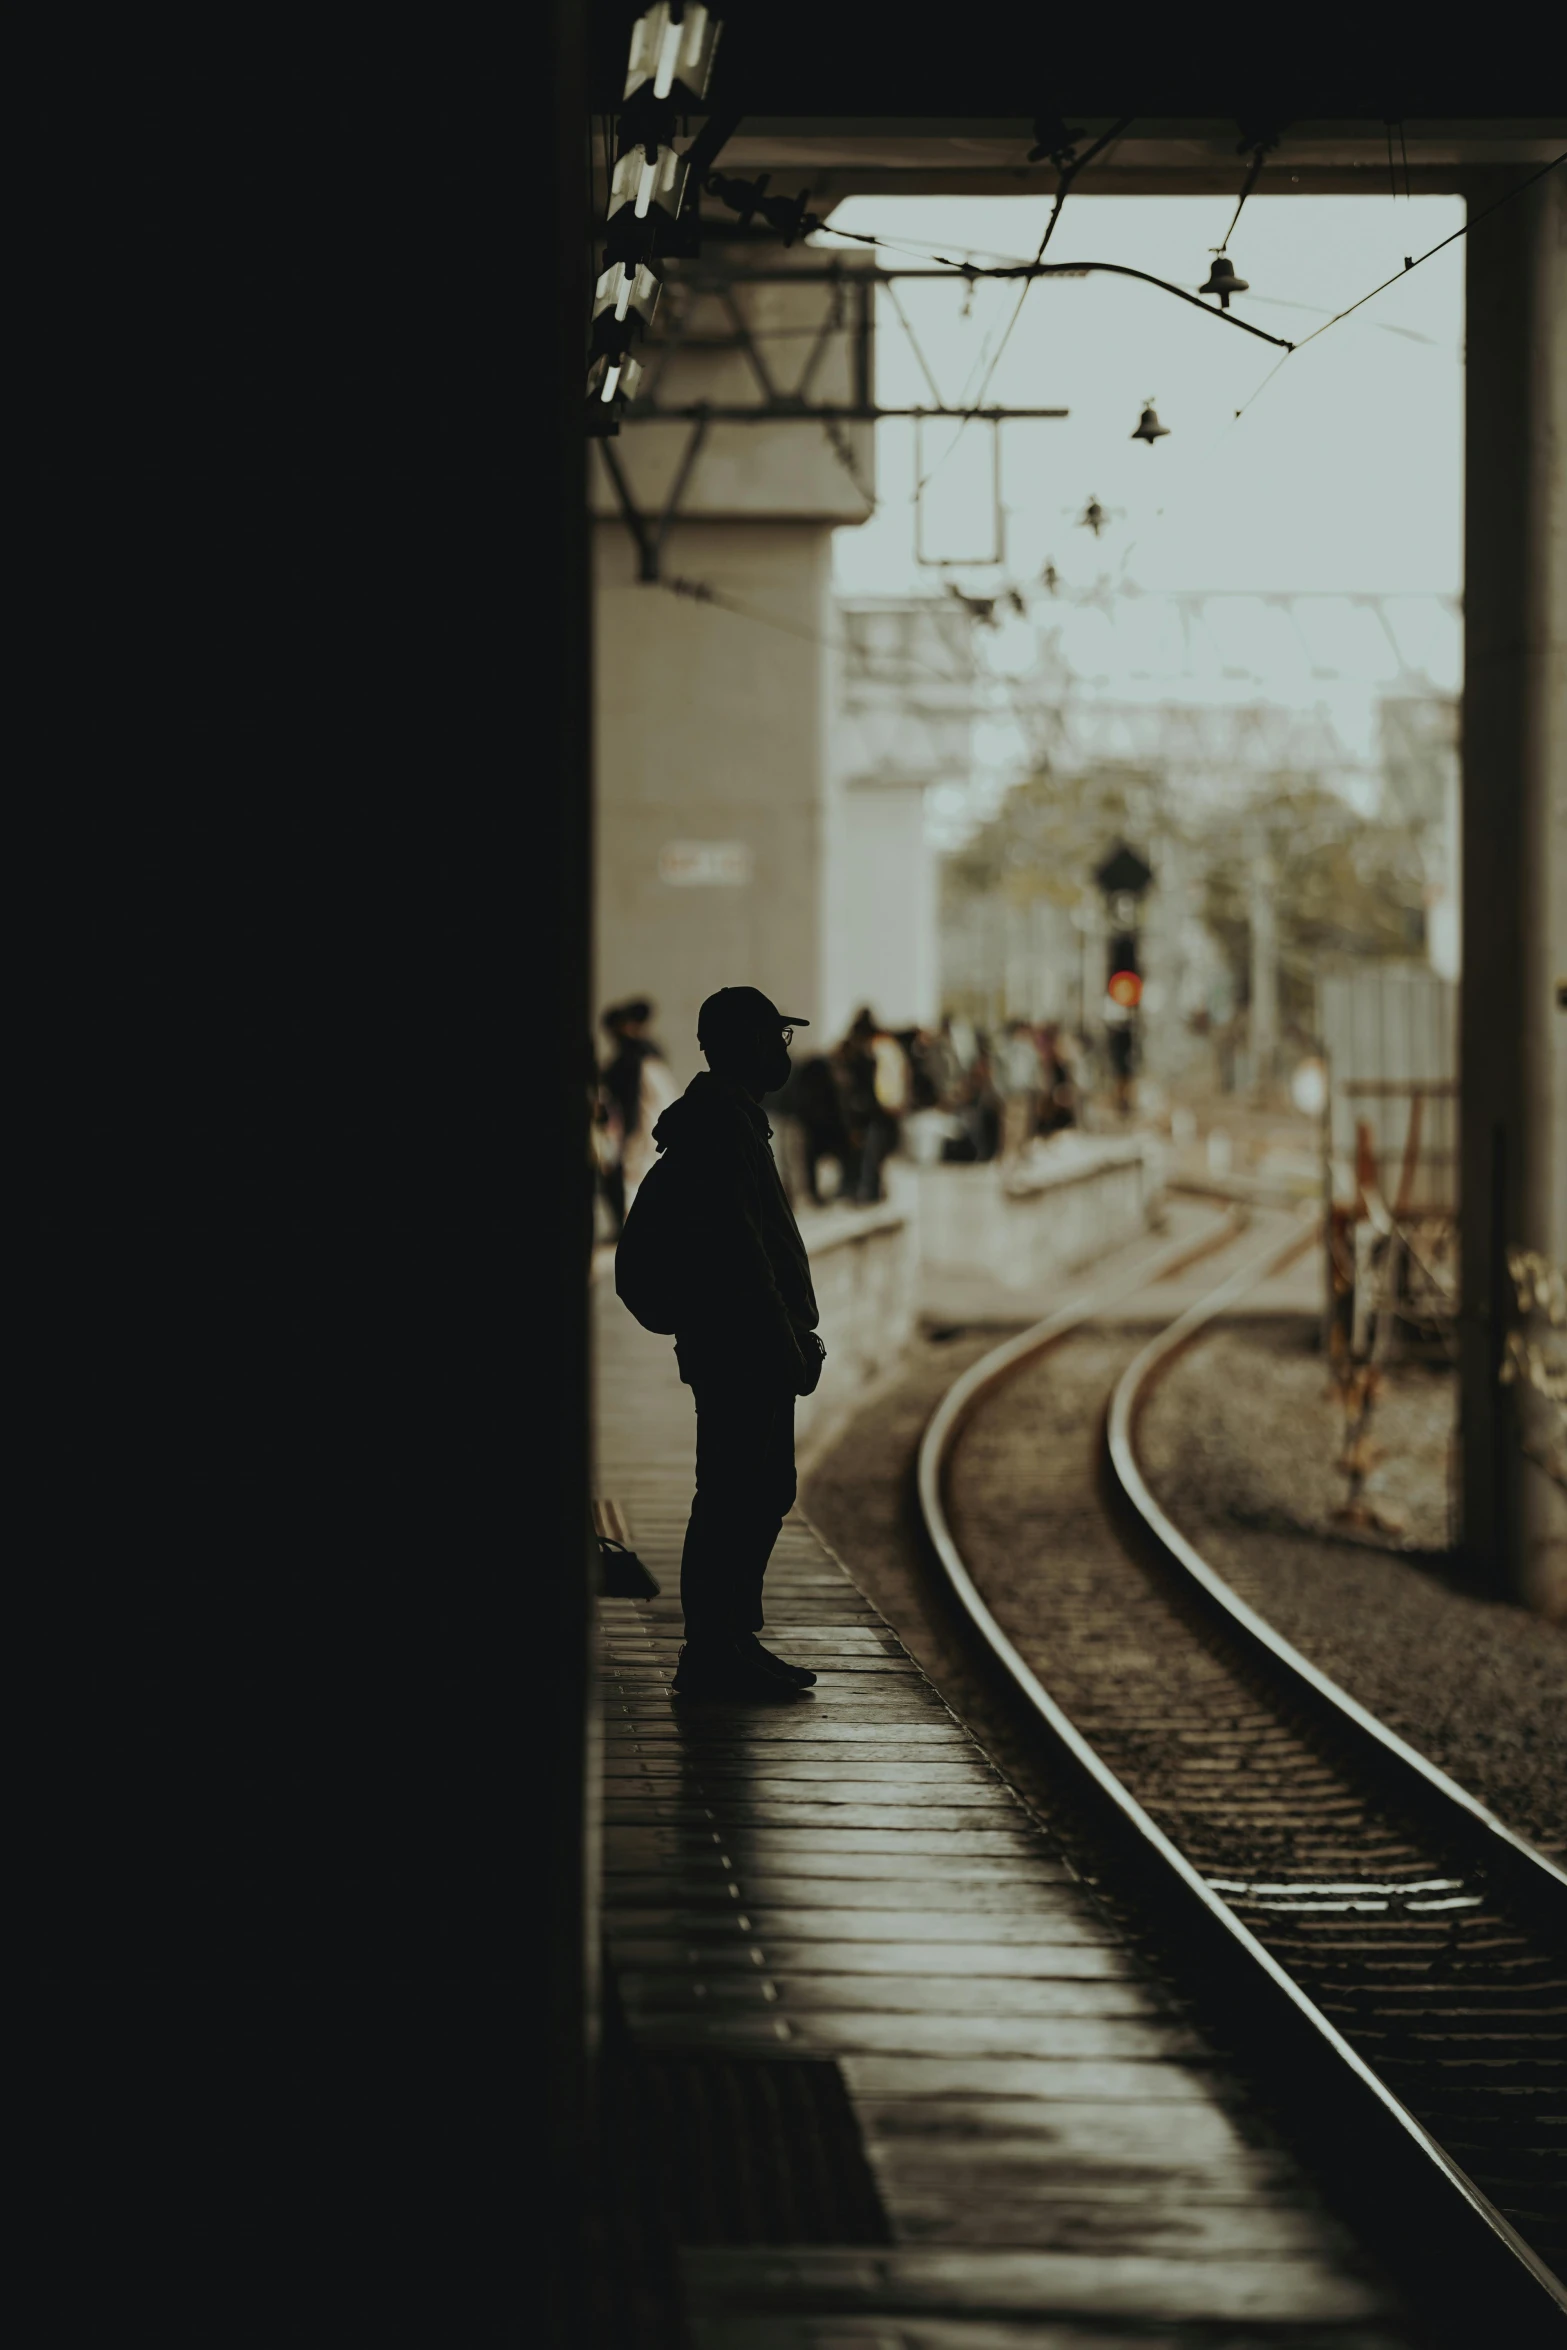 a man standing in the train station, waiting for his next ride